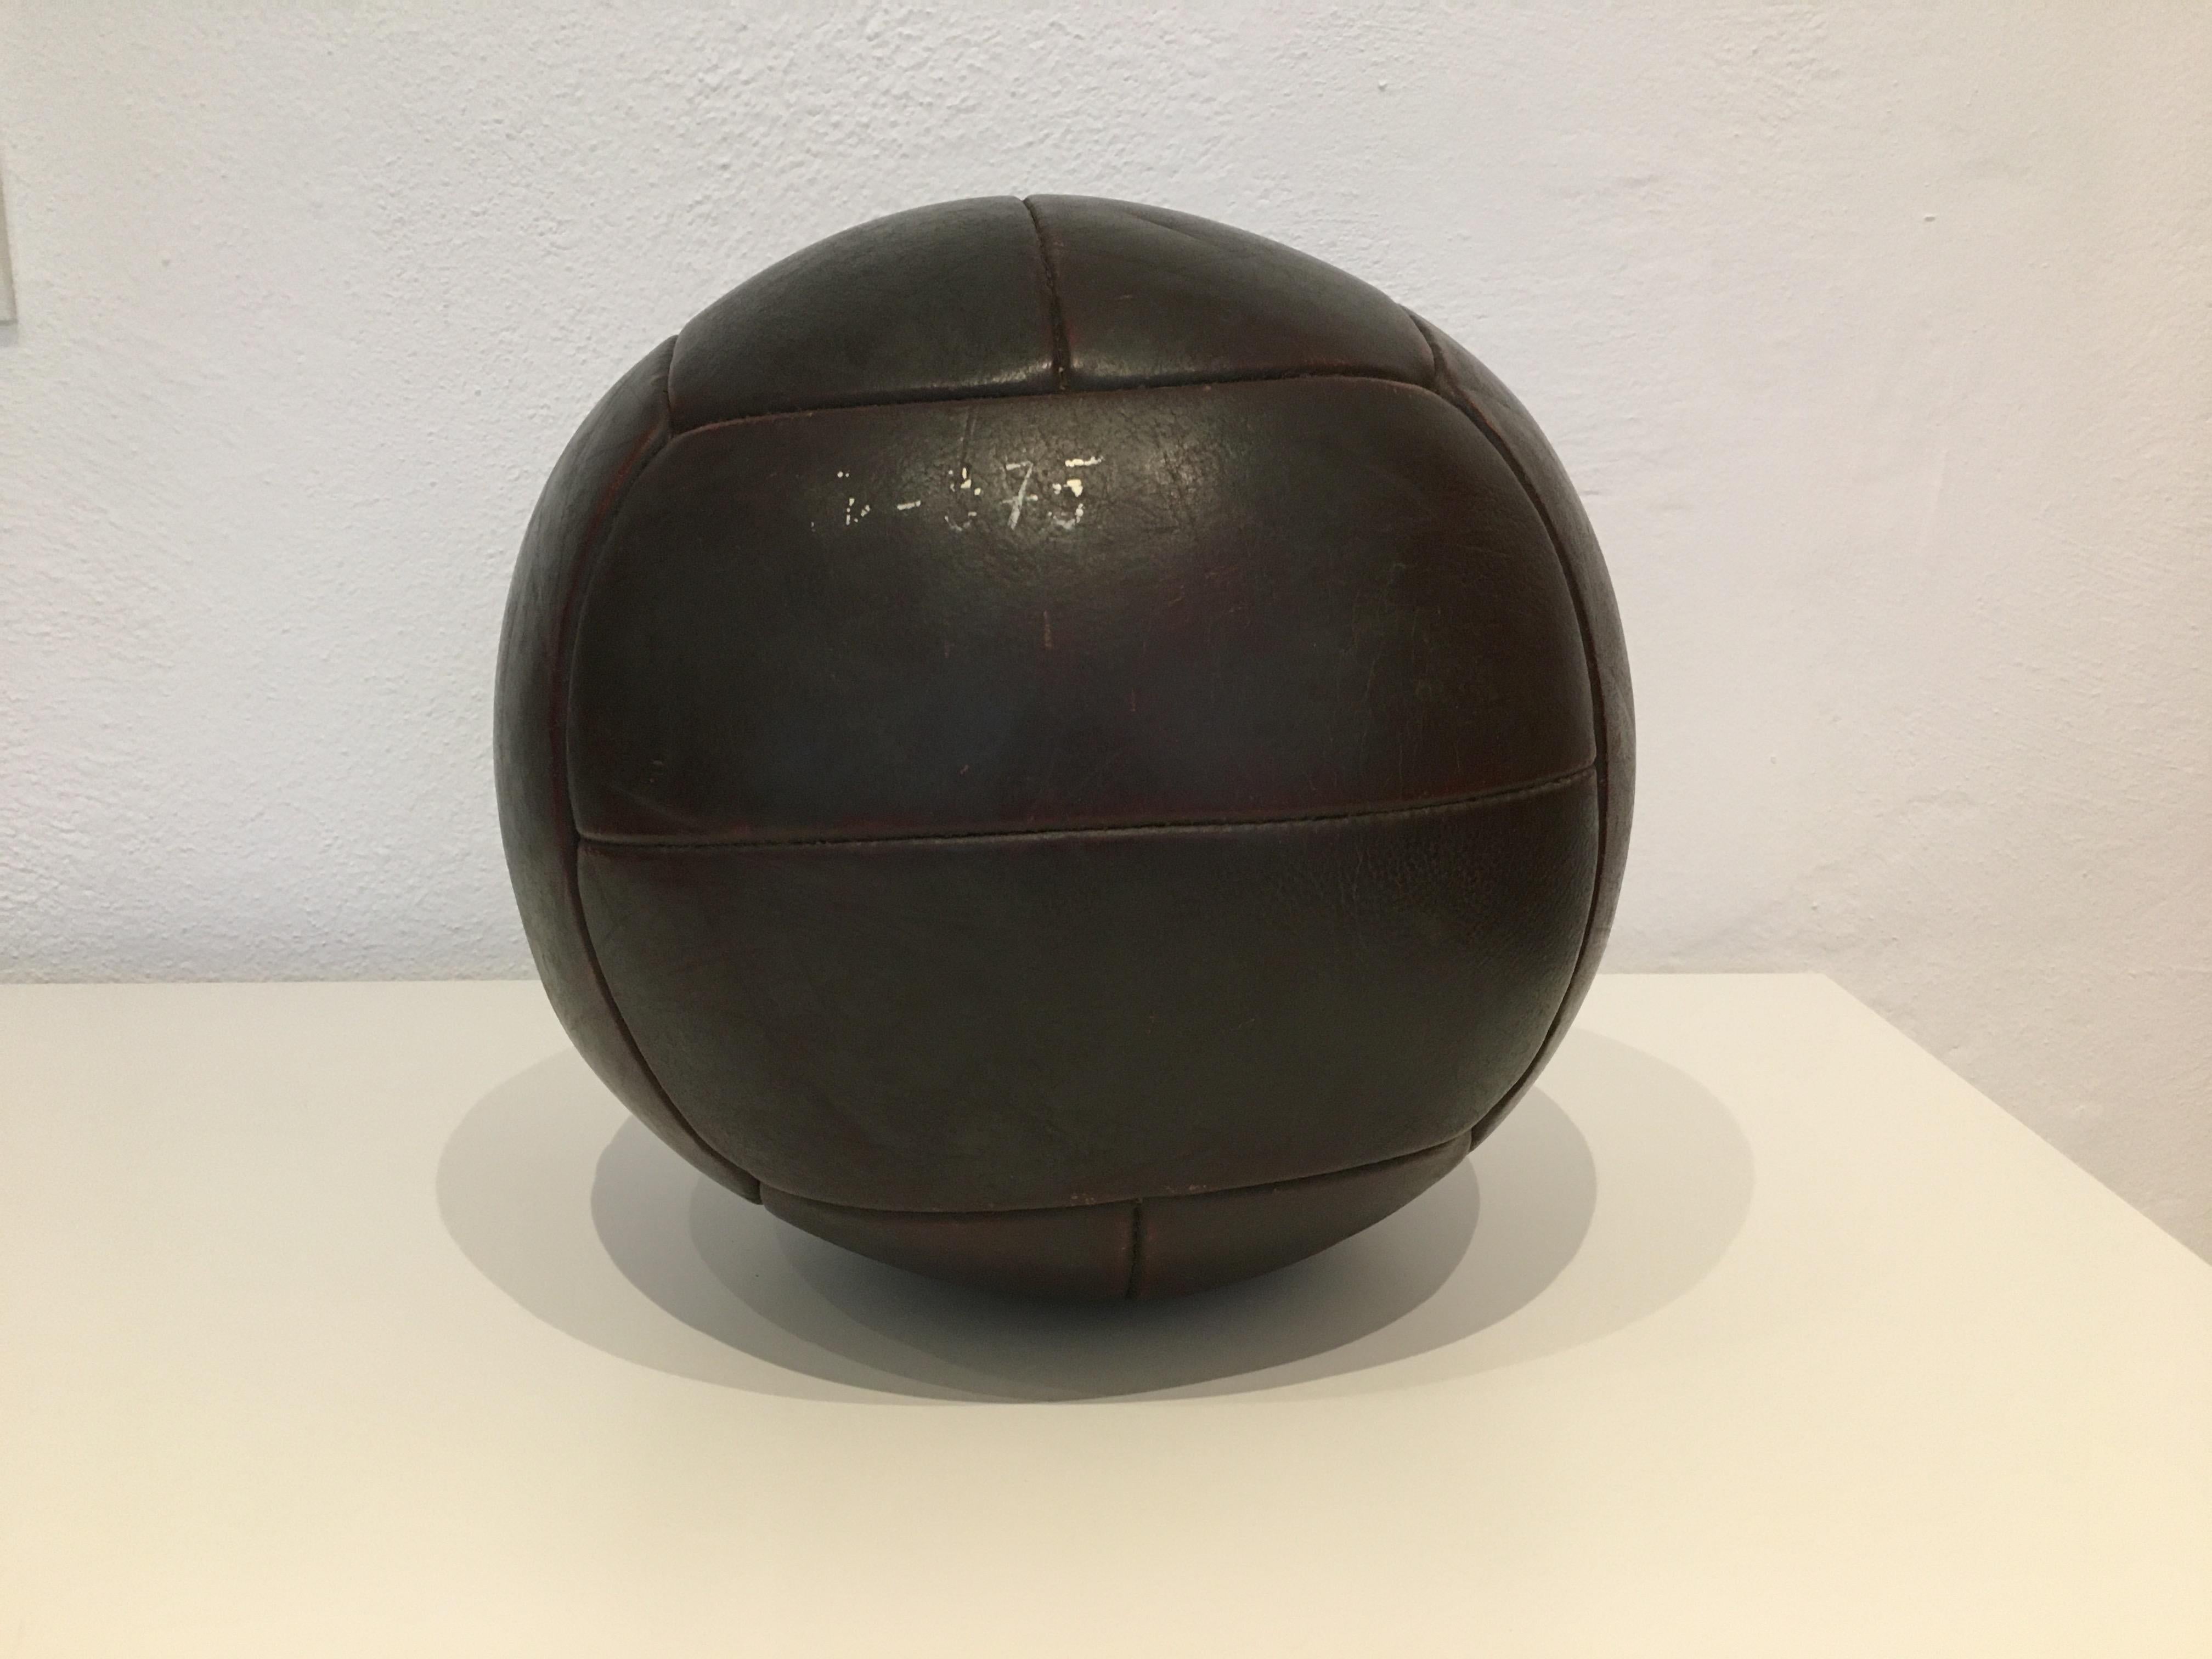 This medicine ball comes from the stock of an old Czech gymnasium. Made in the 1930s. Patina consistent with age and use. Cleaned and treated with a special leather care. Weight: 3kg. Measures: Diameter 10.2 inch.